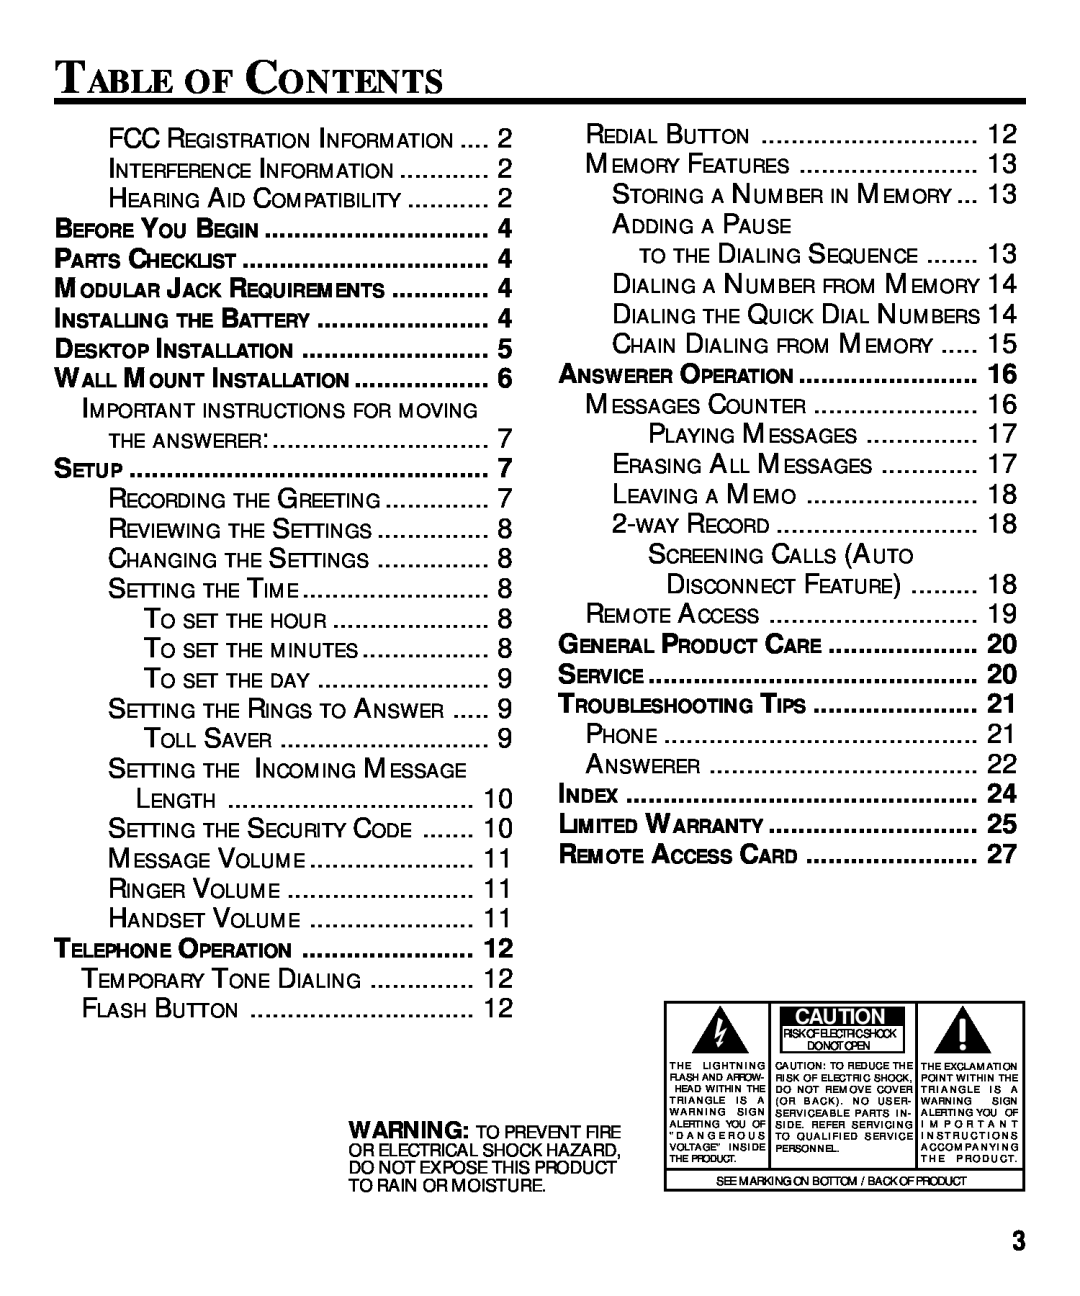 Technicolor - Thomson 29870 Series manual Table Of Contents 